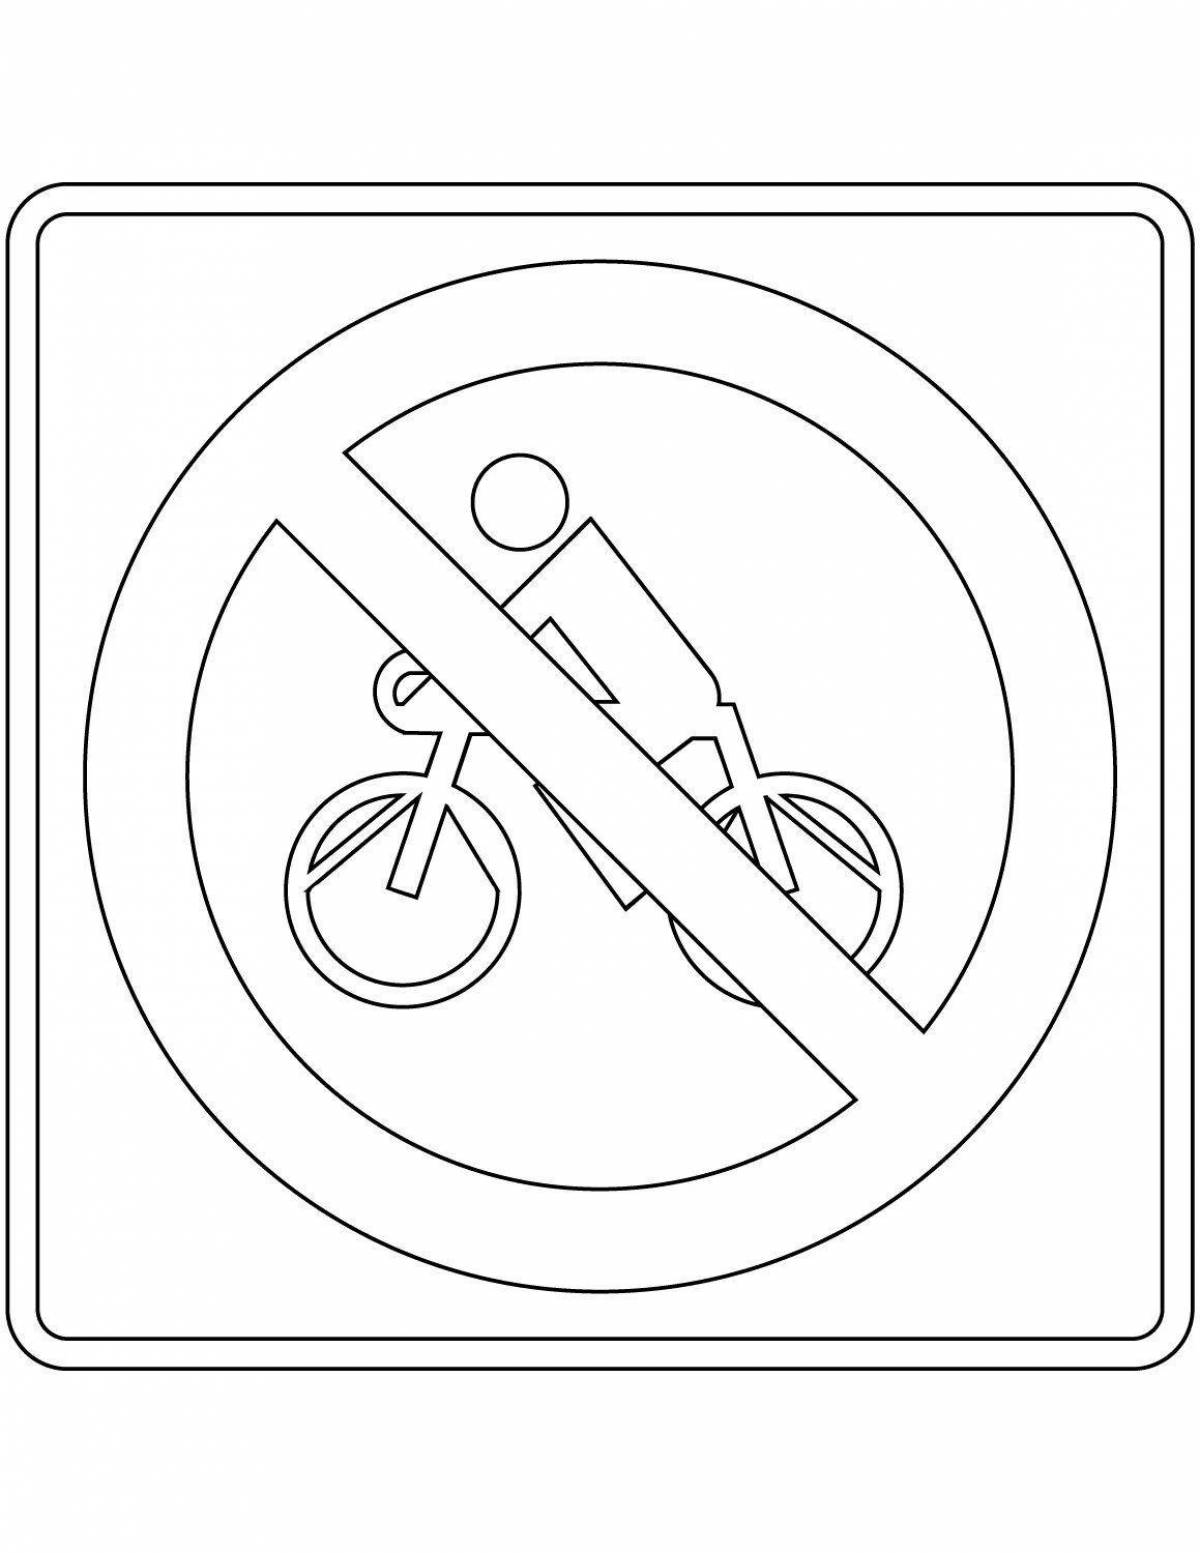 No traffic sign coloring page